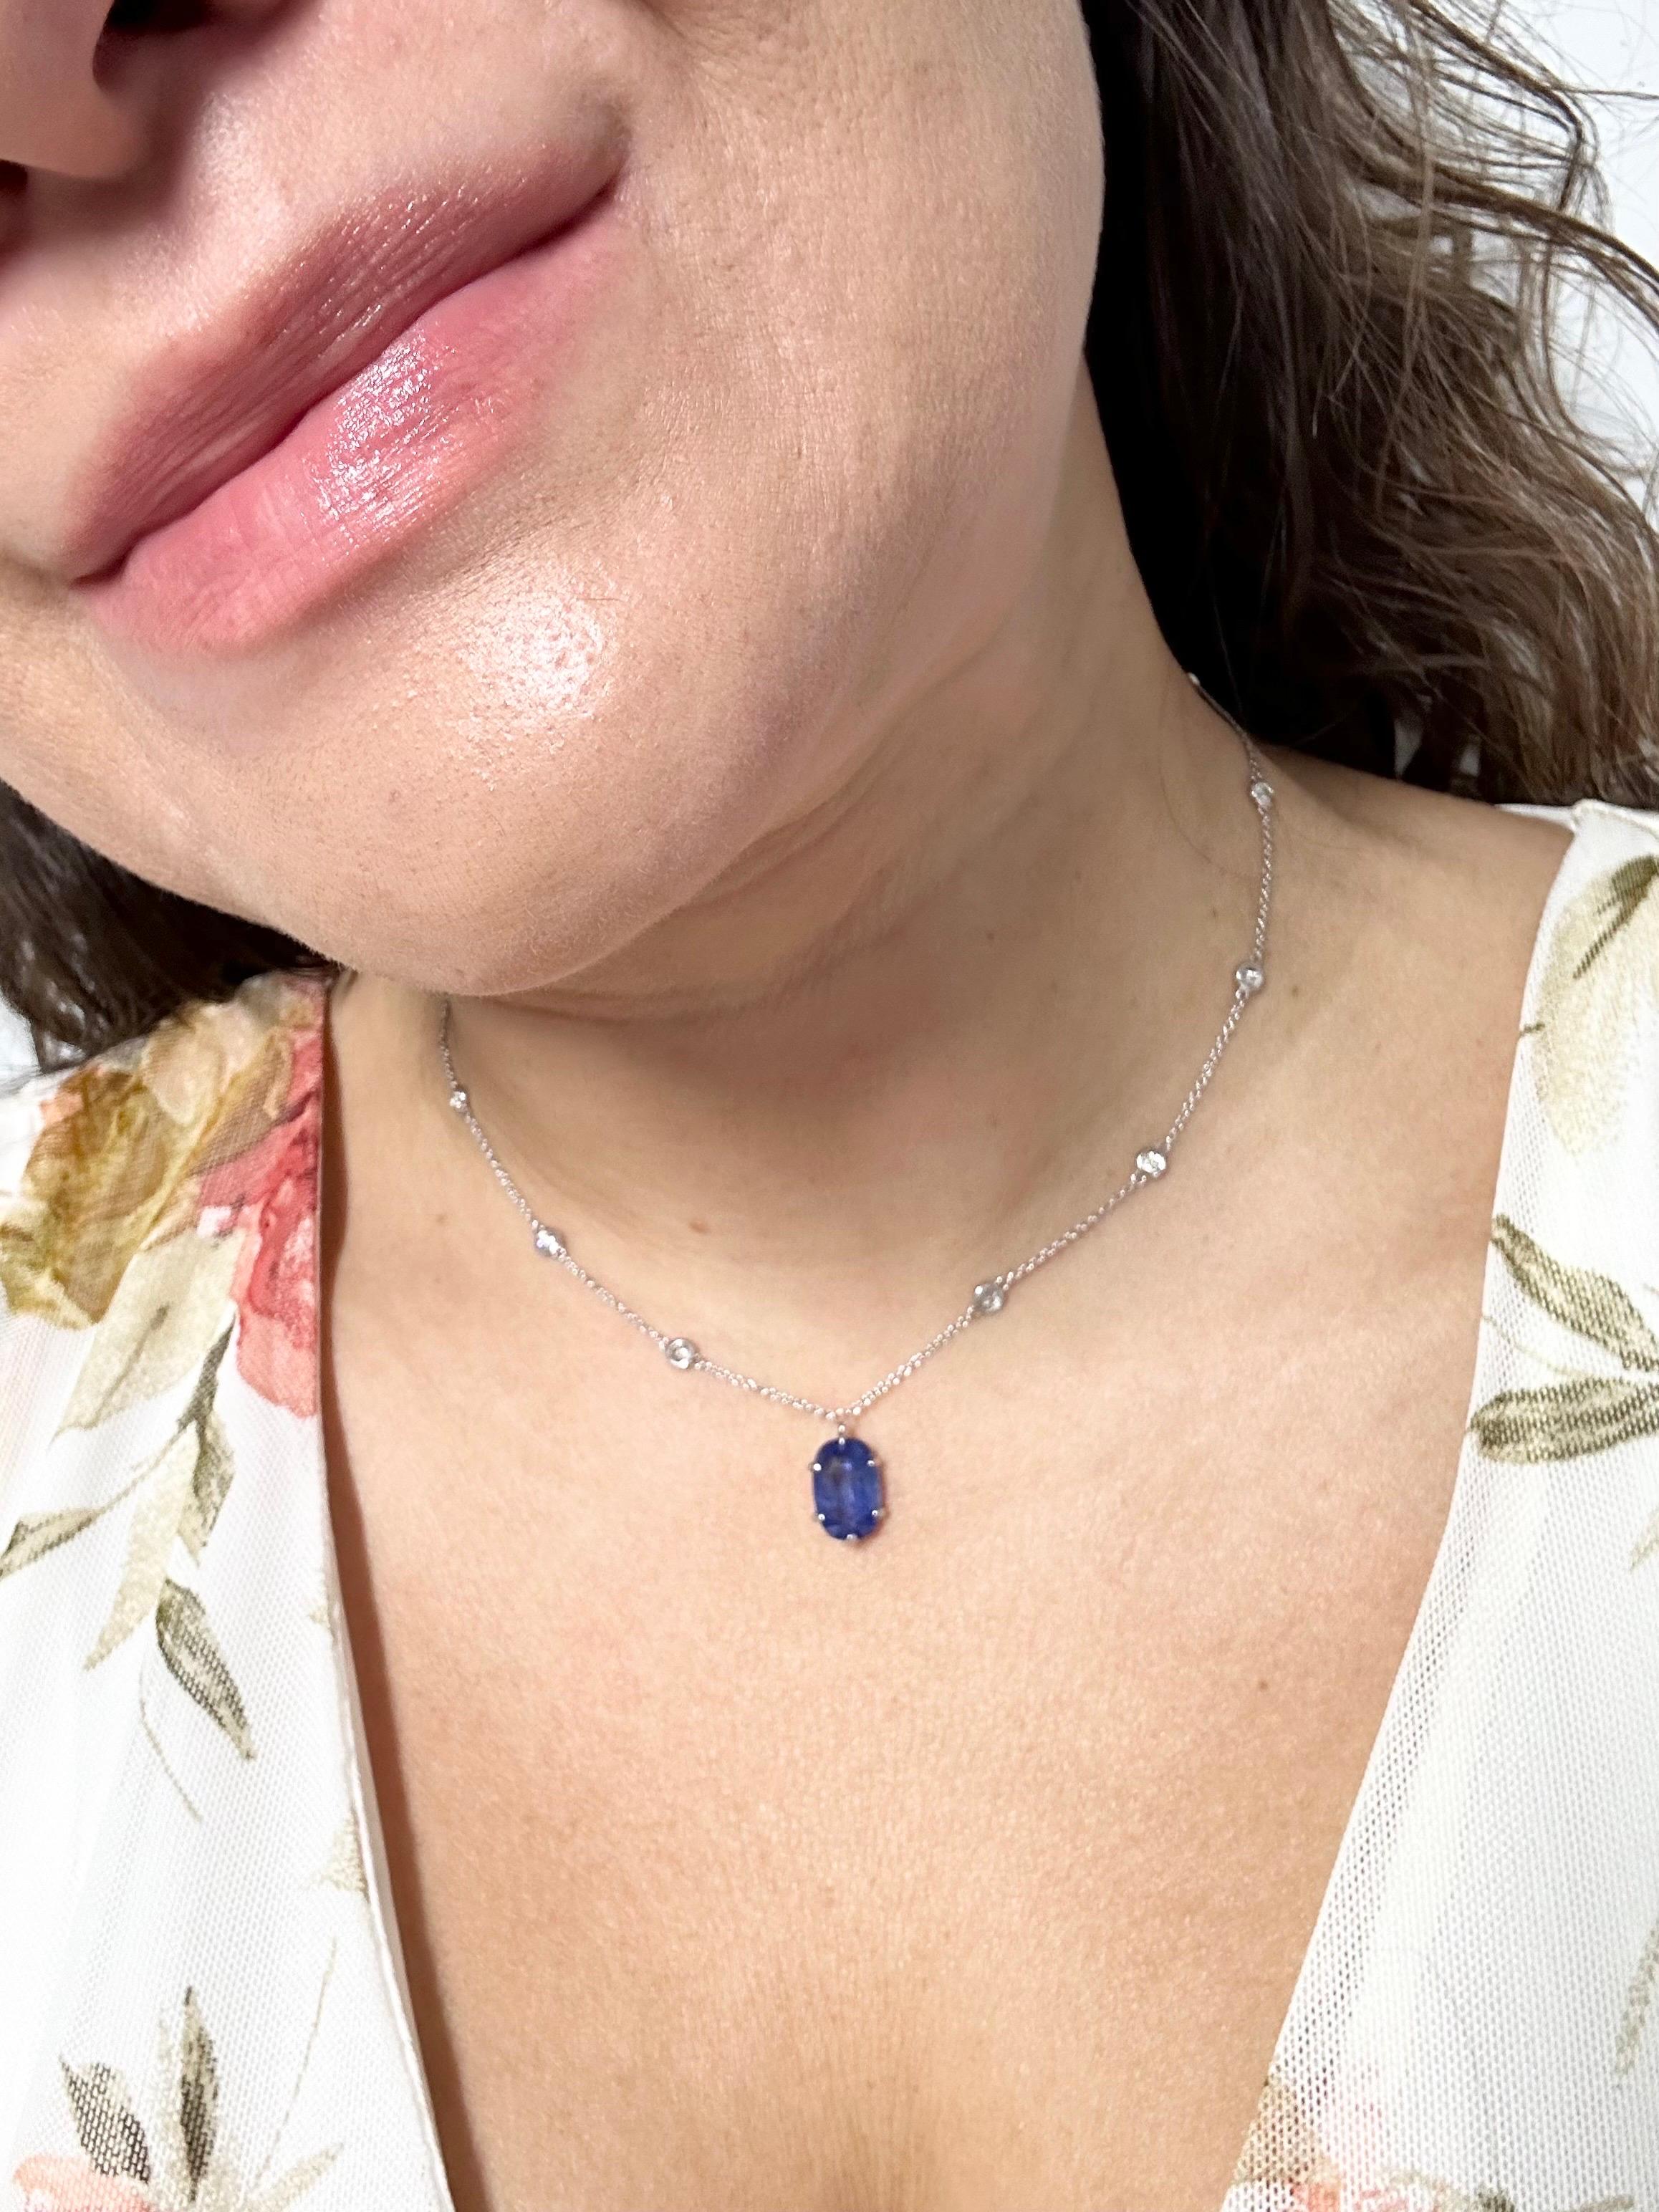 Rare Large Sapphire Diamond Pendant Necklace by the Yard 14kt 5.14ct Sapphire For Sale 4